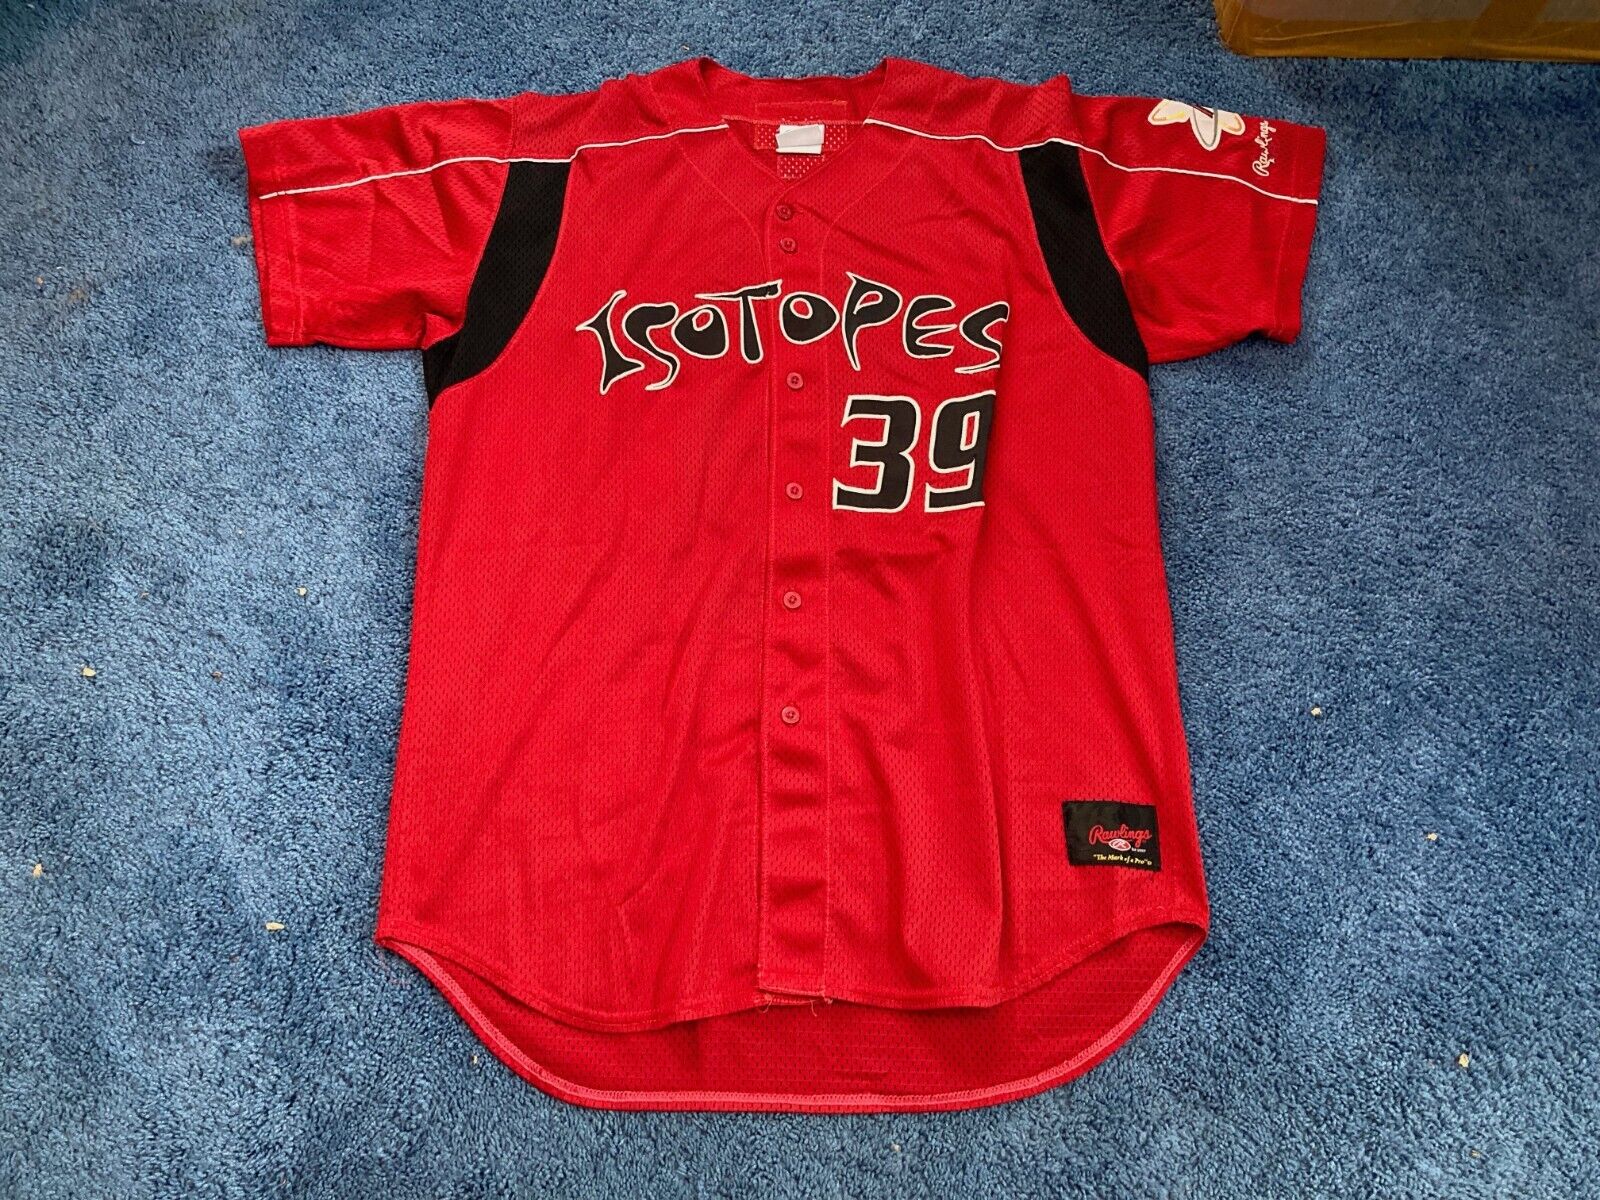 27 Game Used Worn Albuquerque Isotopes Red Jersey Dodgers